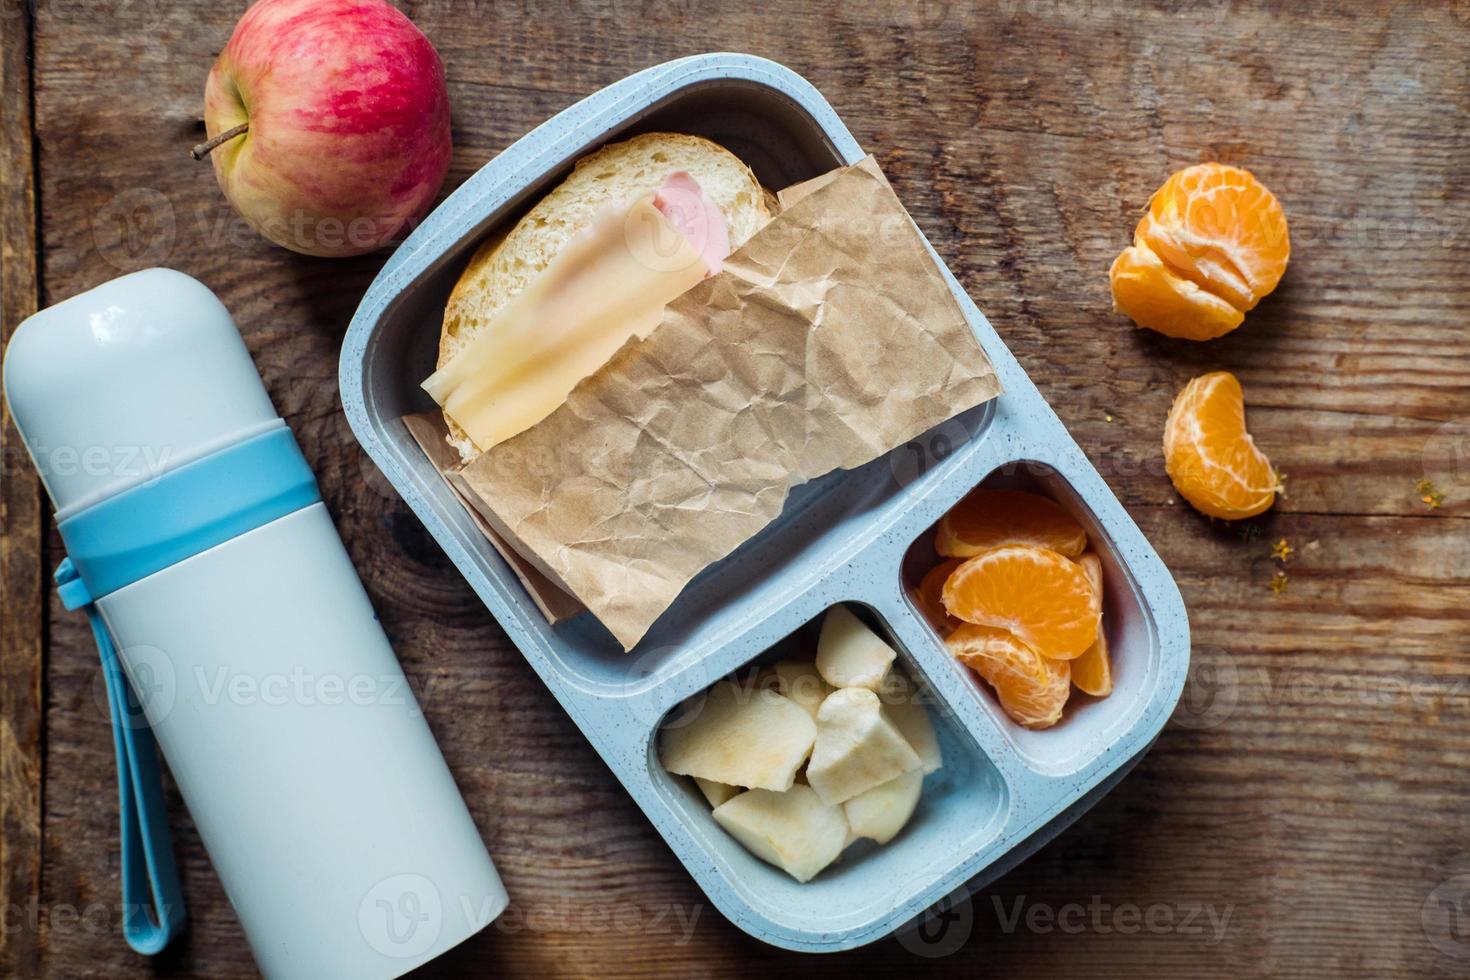 schoolboy lunch box with thermos on wooden background.apple,tangerine,sandwich in lunchbox and water bottle photo